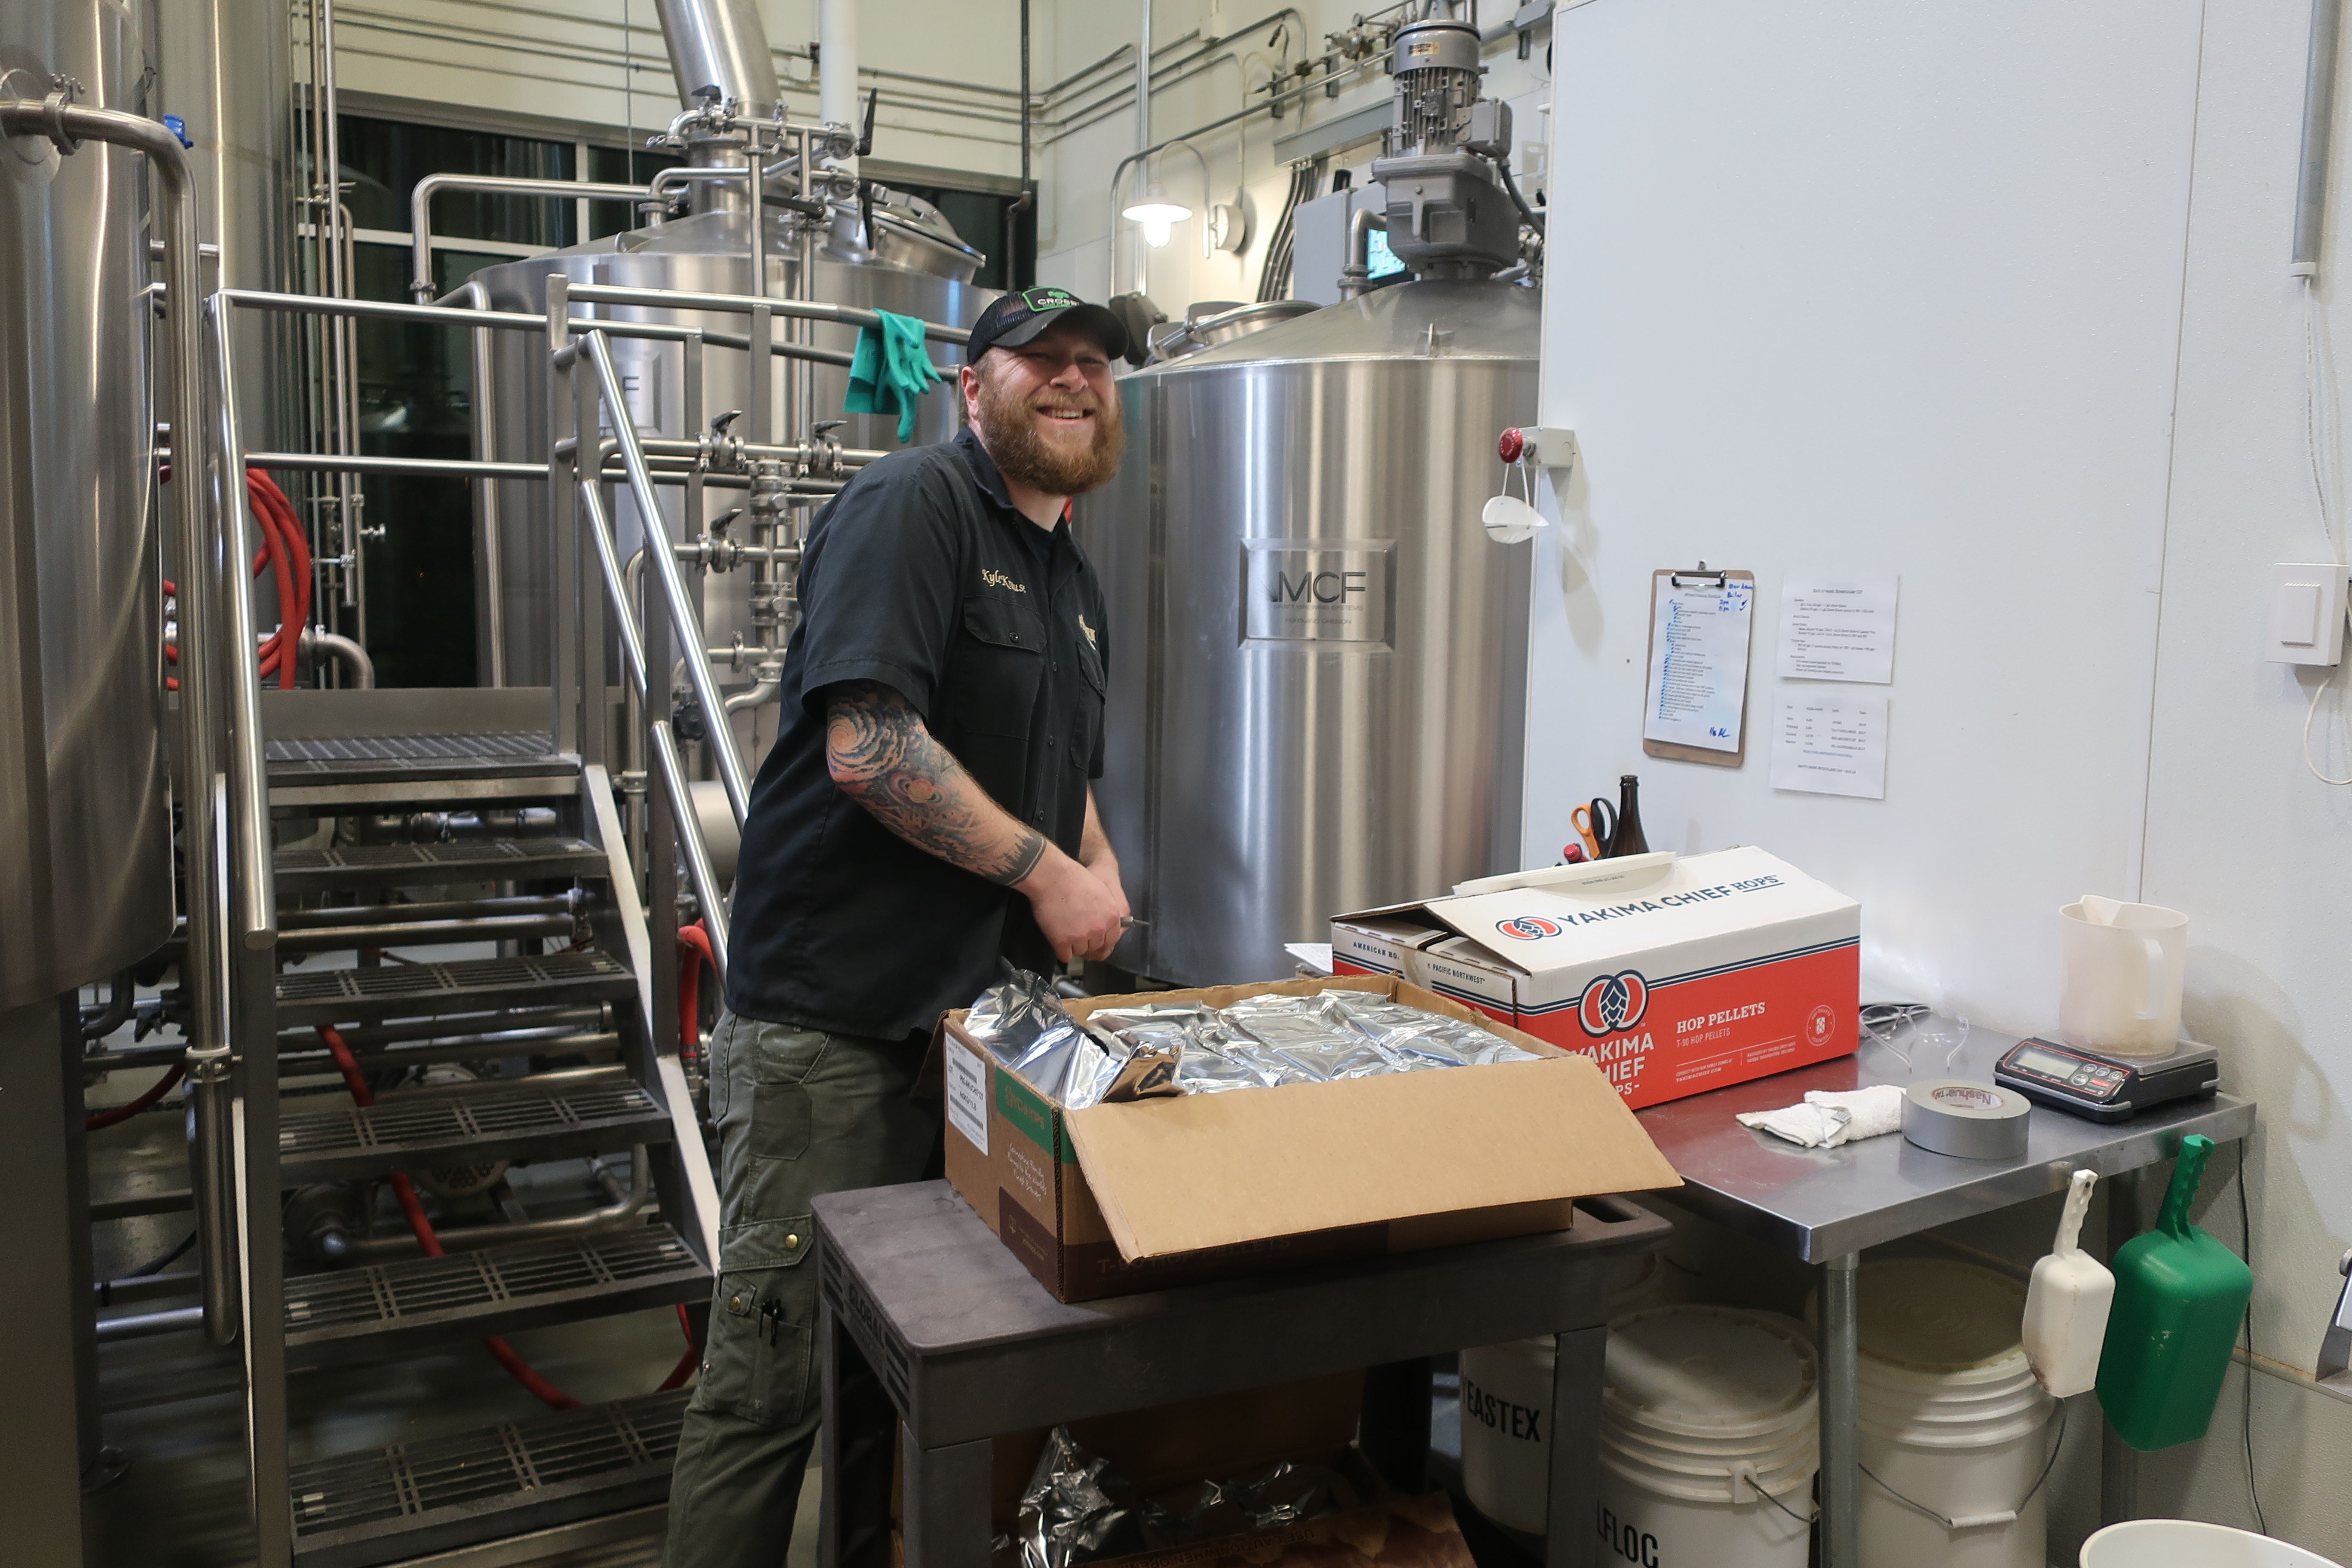 pFriem Family Brewers brewer Kyle Krause brewing during our evening brewery tour.